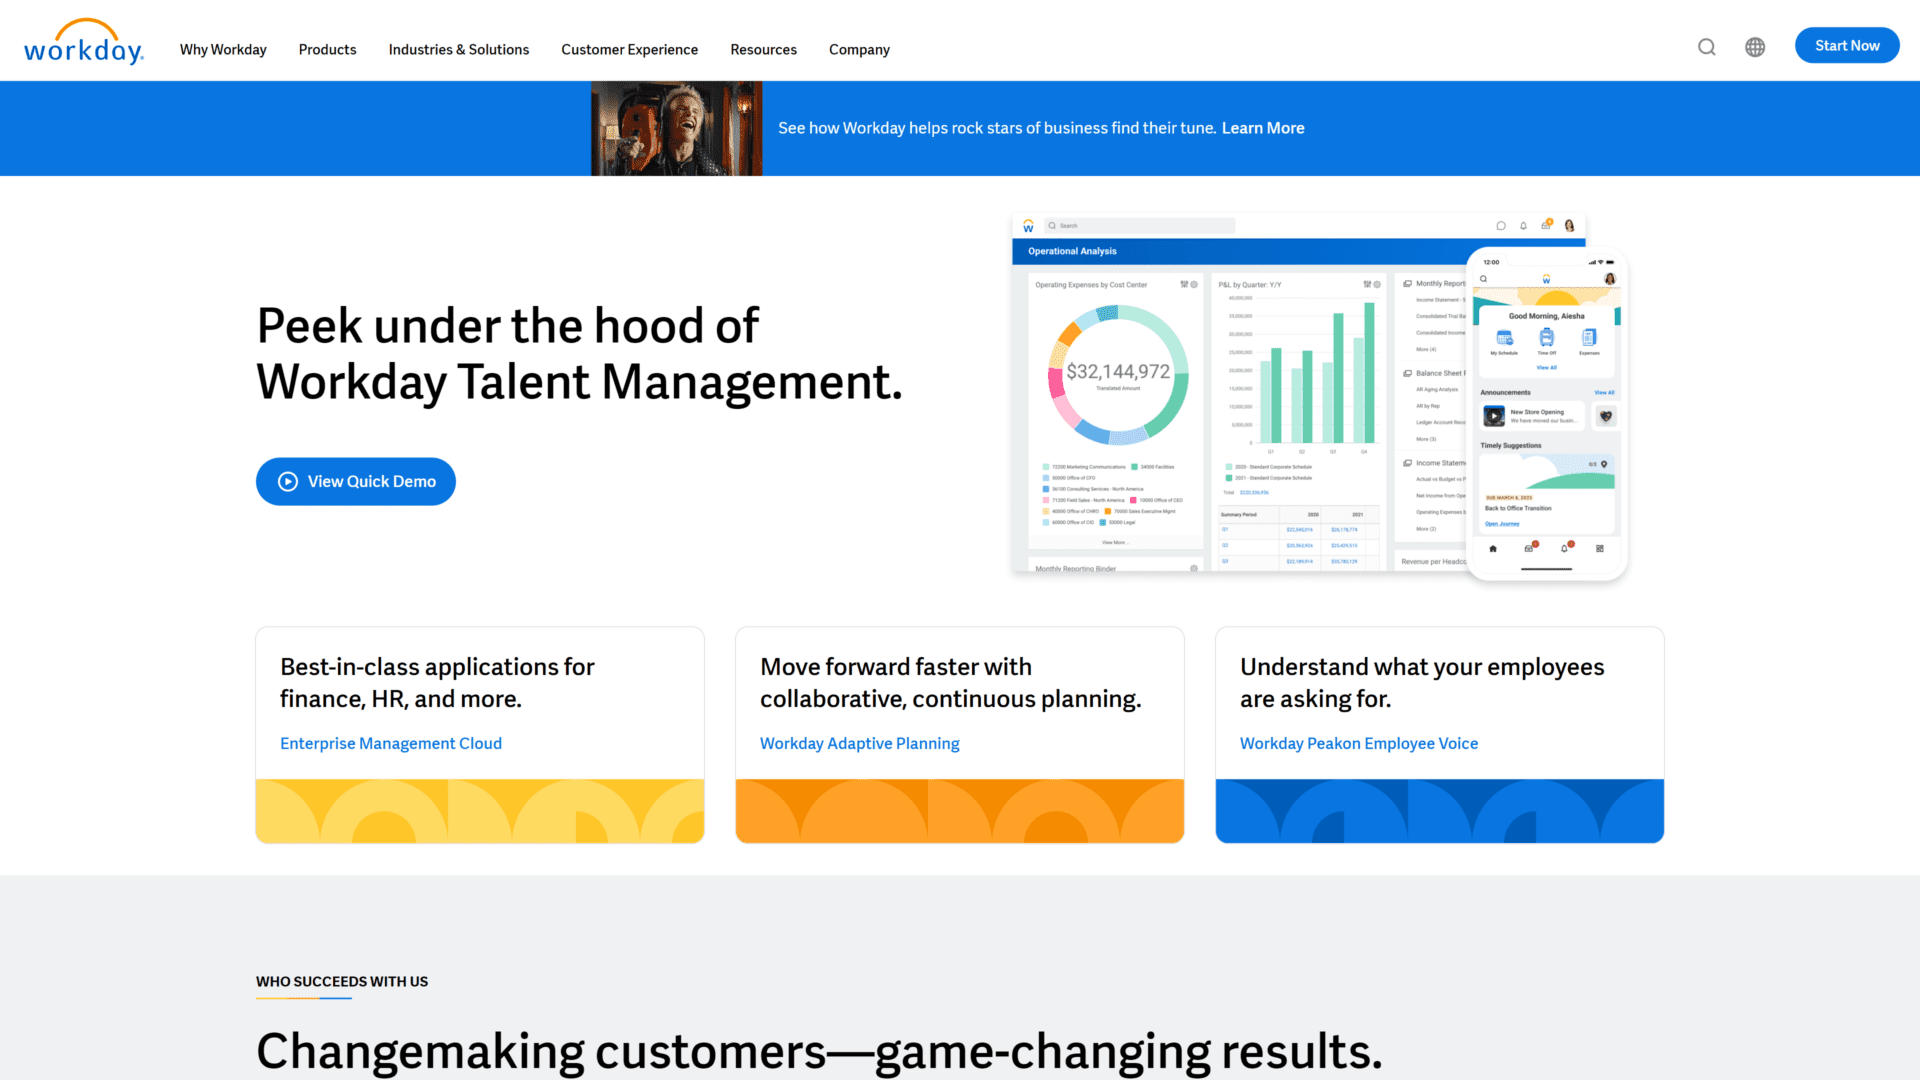 A screenshot of the workday homepage